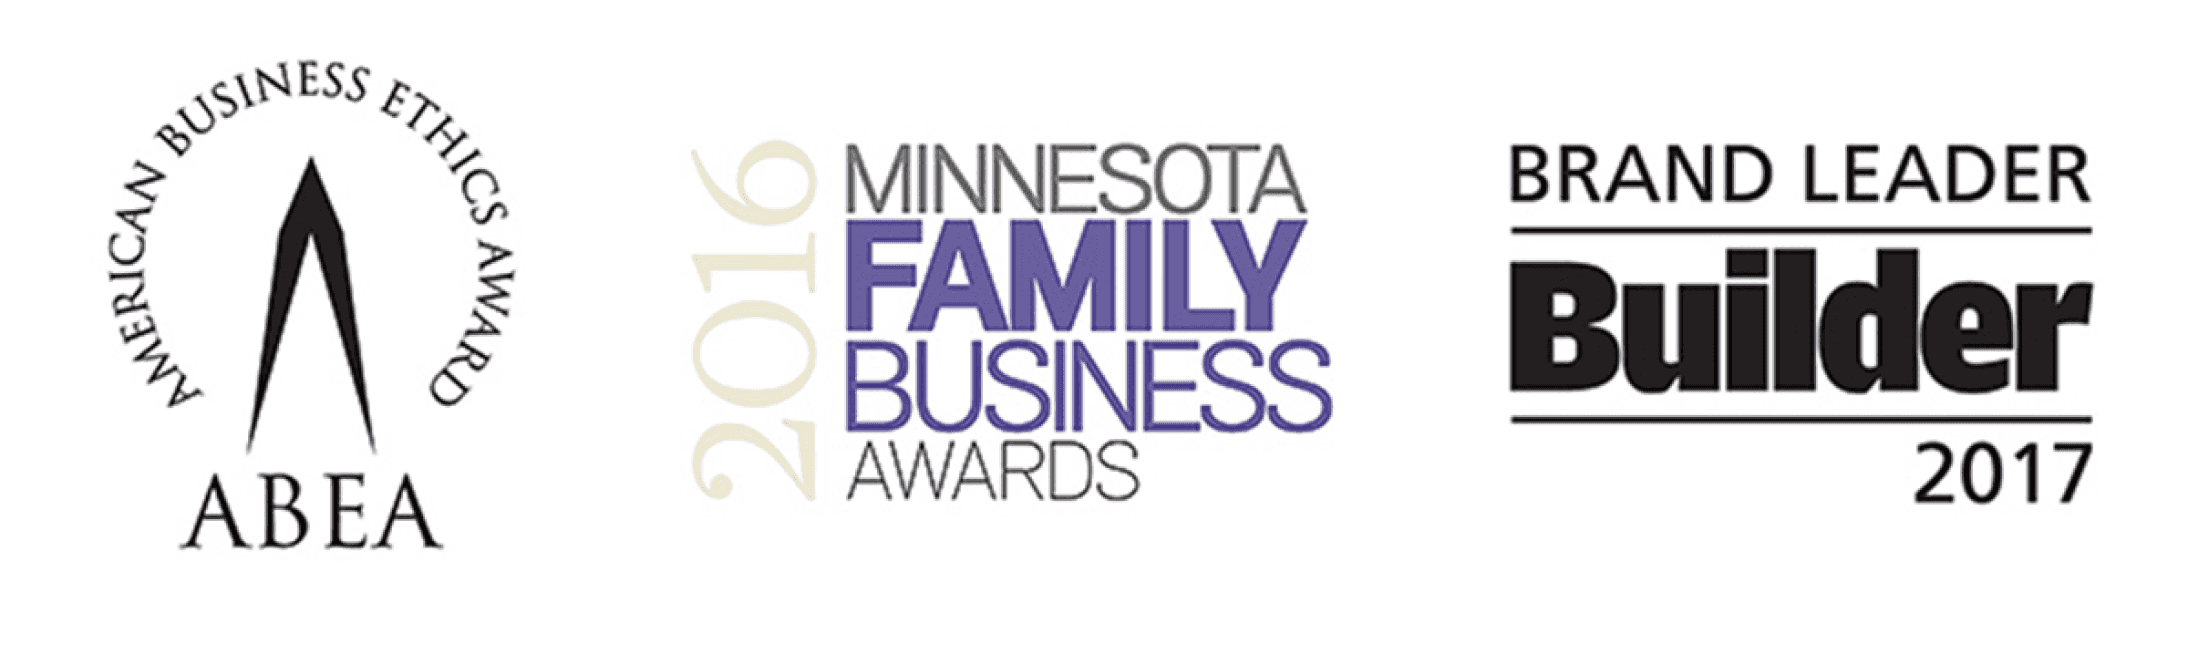 Recognitions for ABEA - American Business Ethics Award, 2016 Minnesota Family Business Awards, and Brand Leader Builder 2017